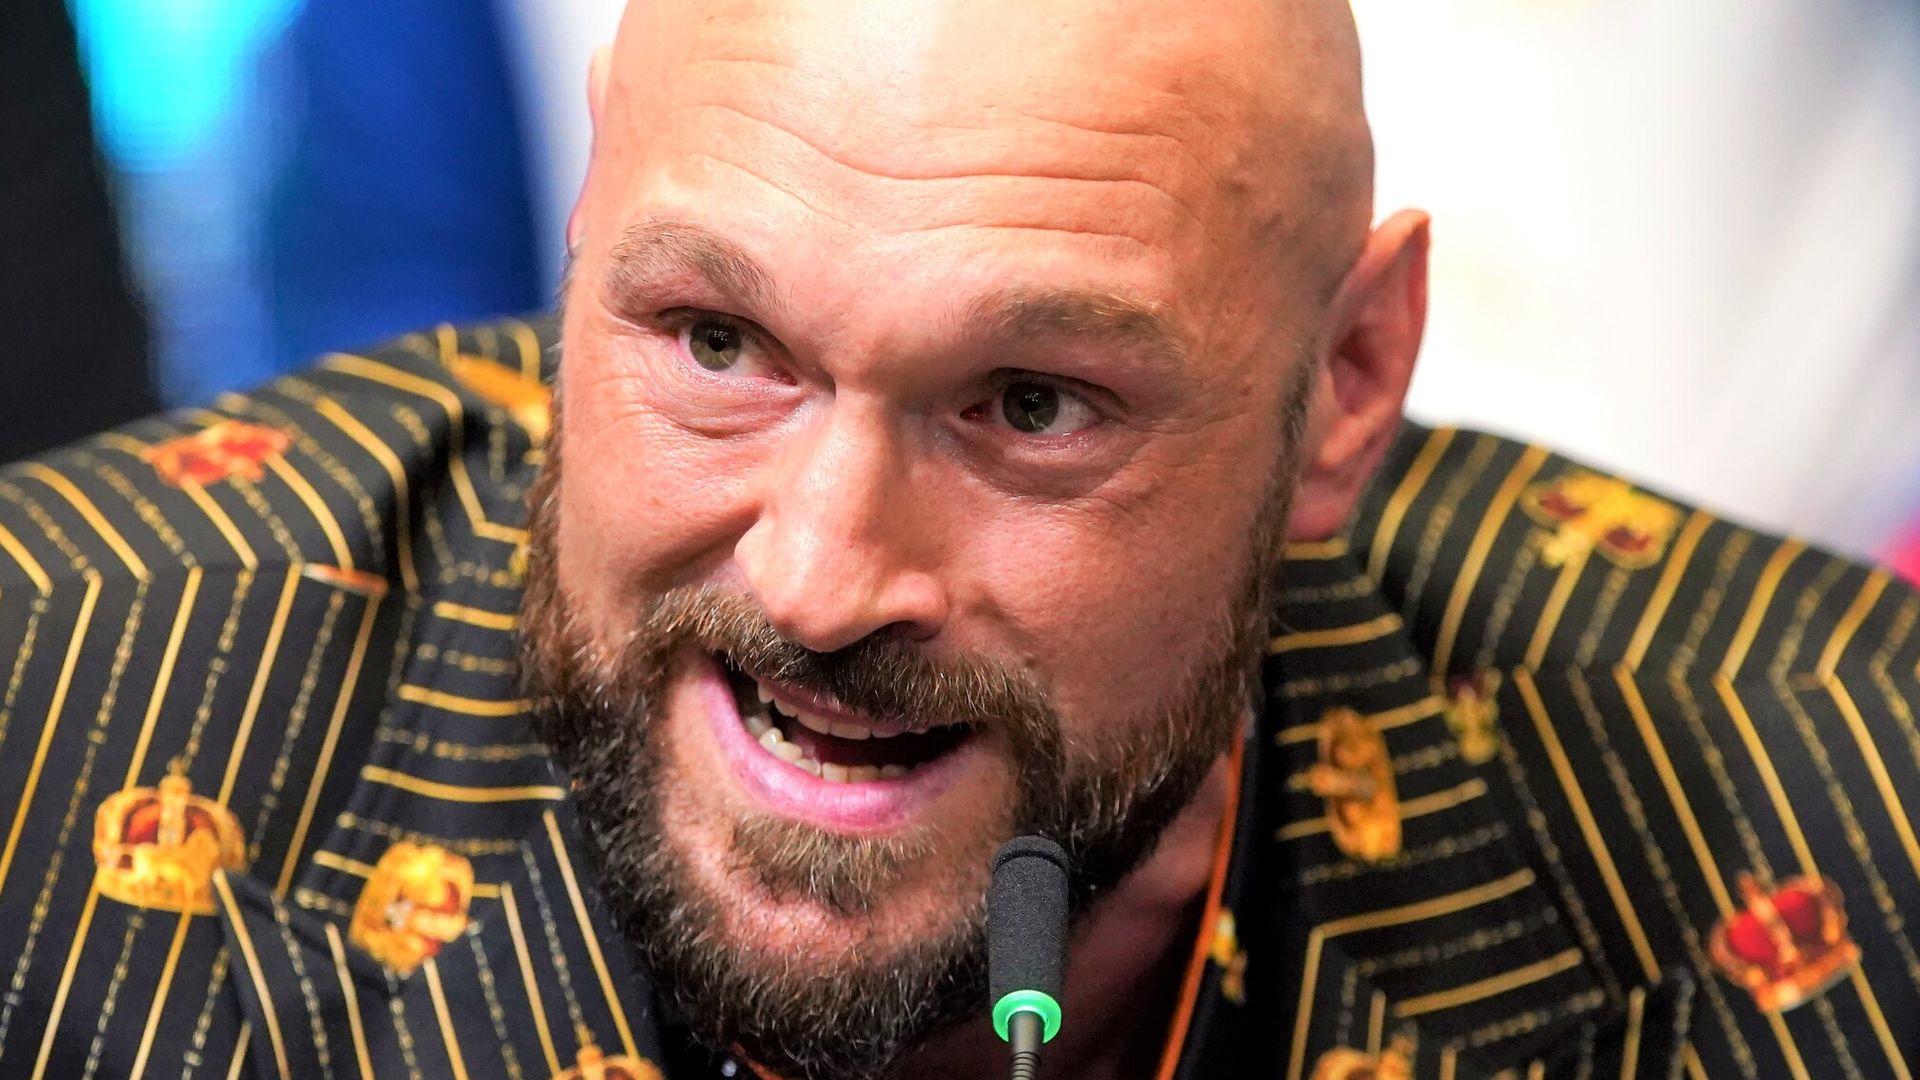 Fury blames Usyk for fight collapse